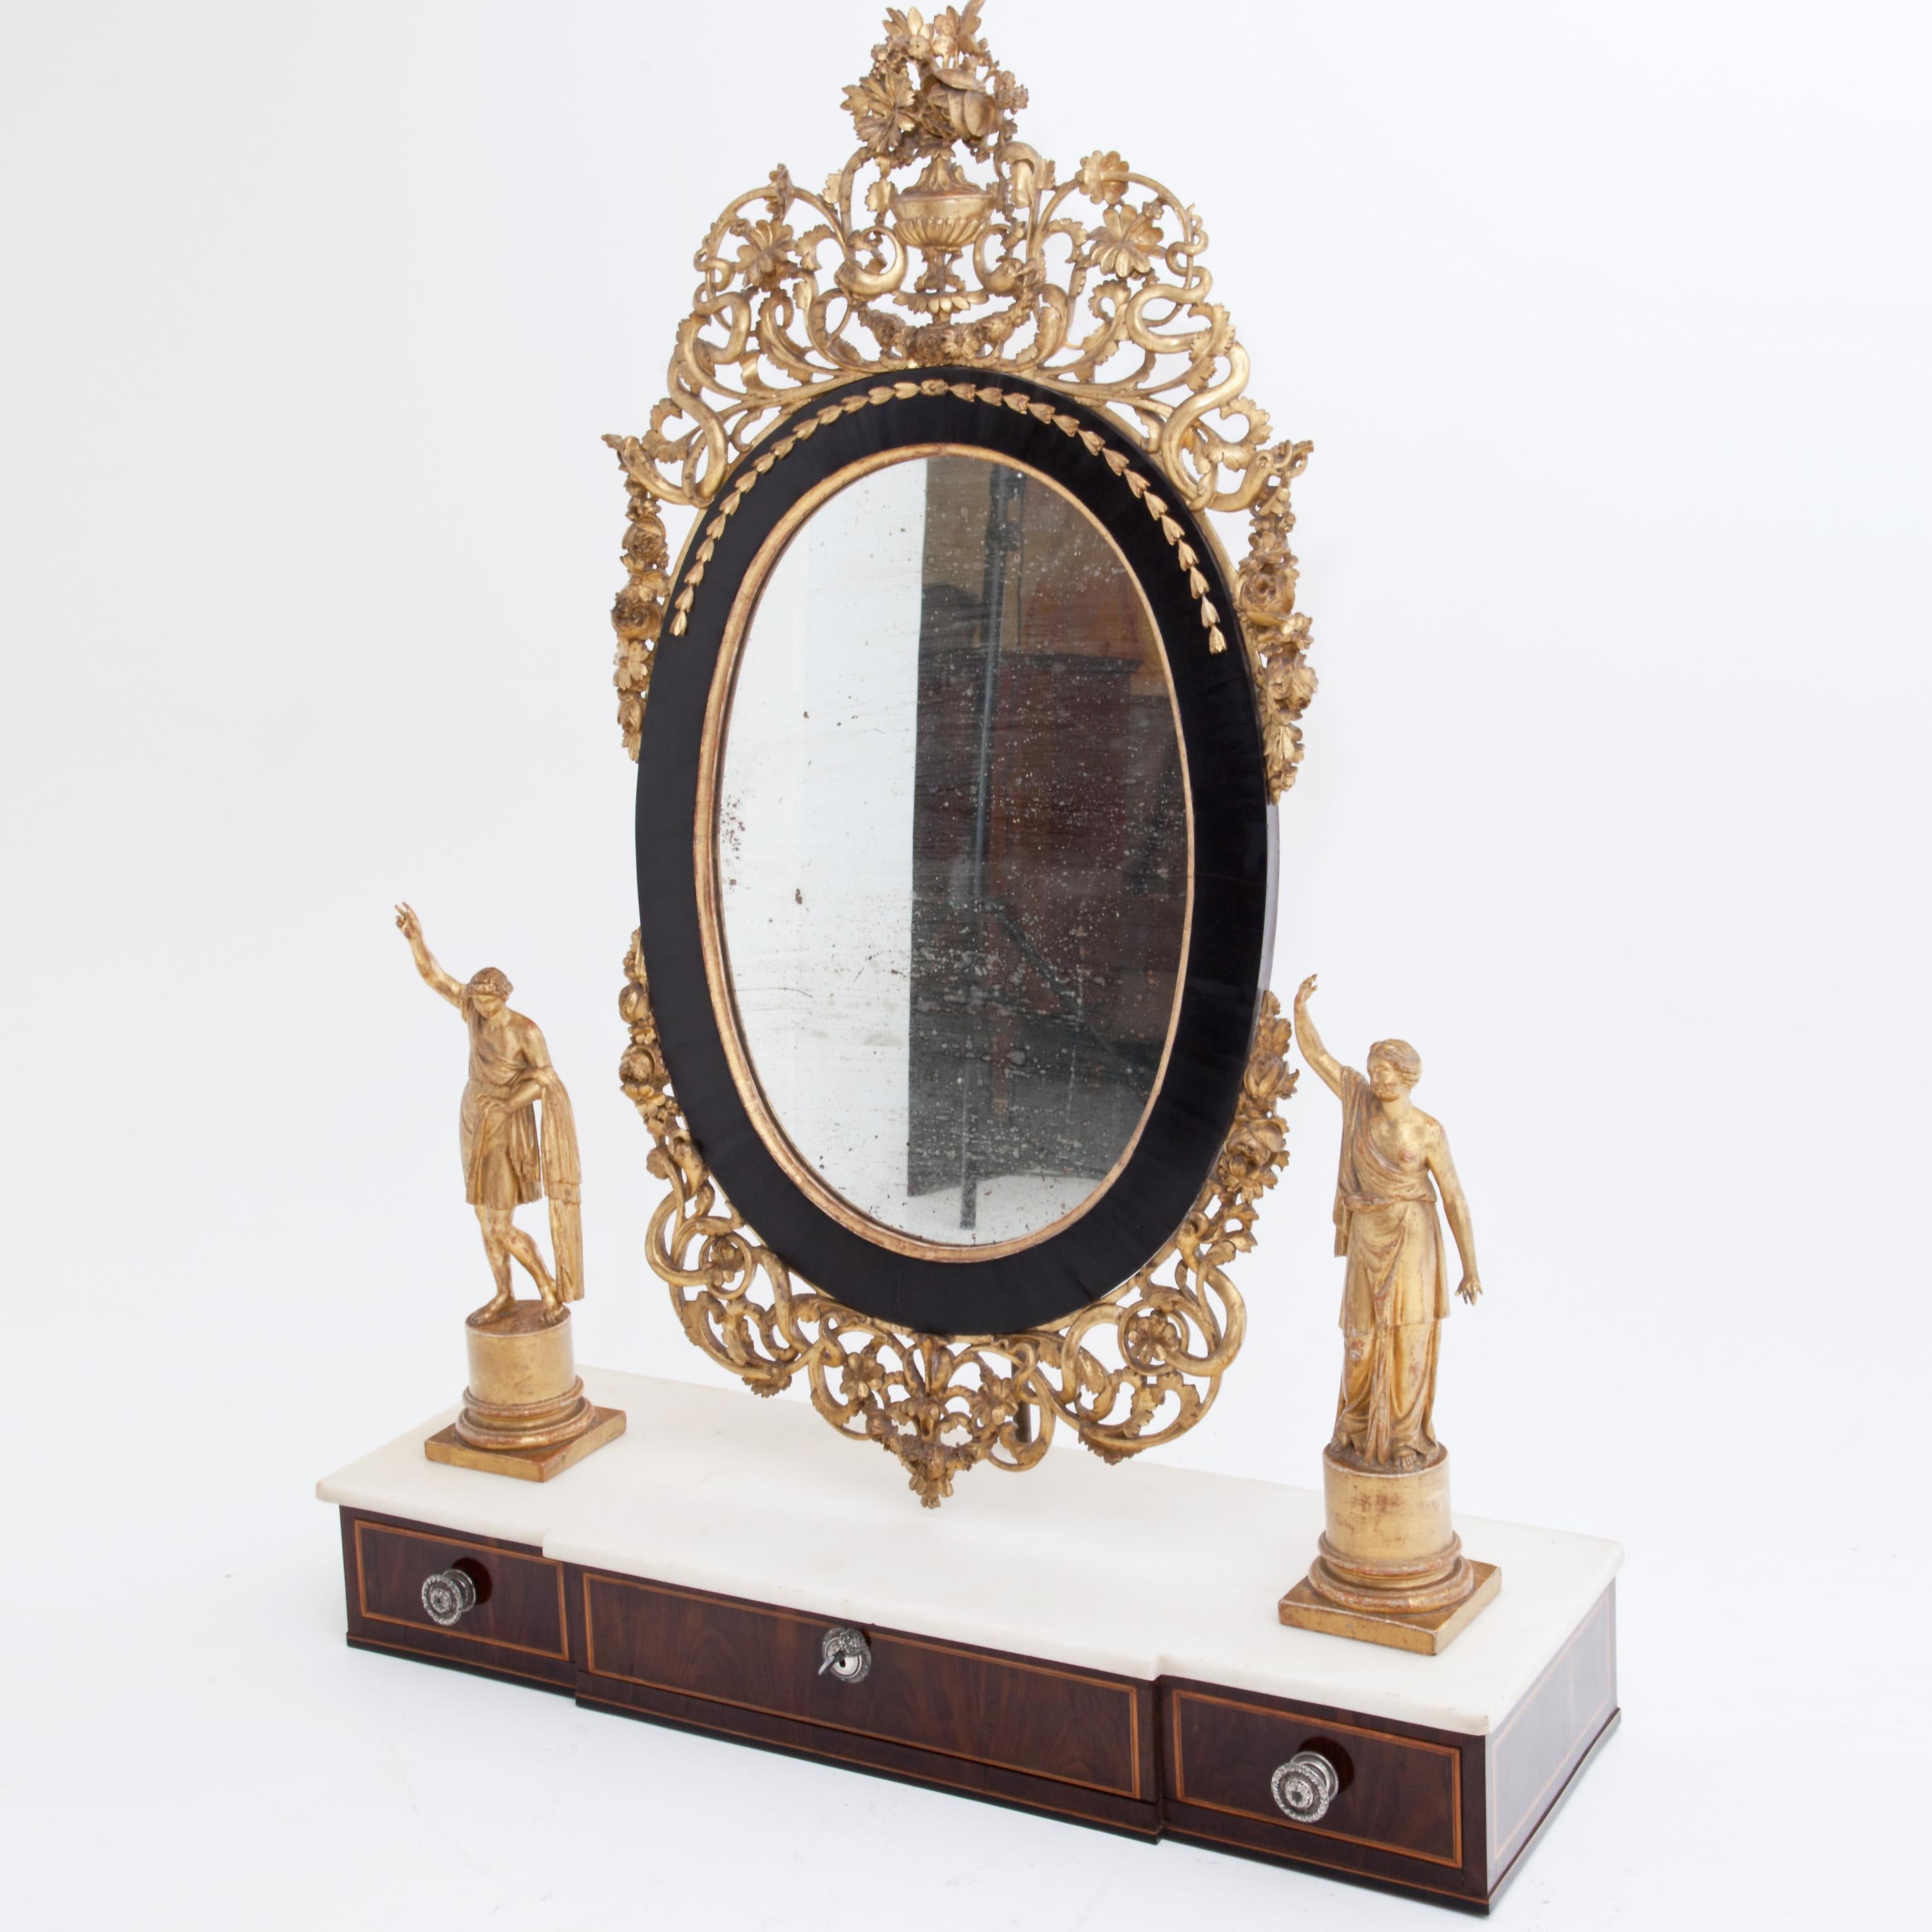 Neoclassical Giltwood and Mahogany Mirror with Marble Top, Piedmont / Italy, 18th Century